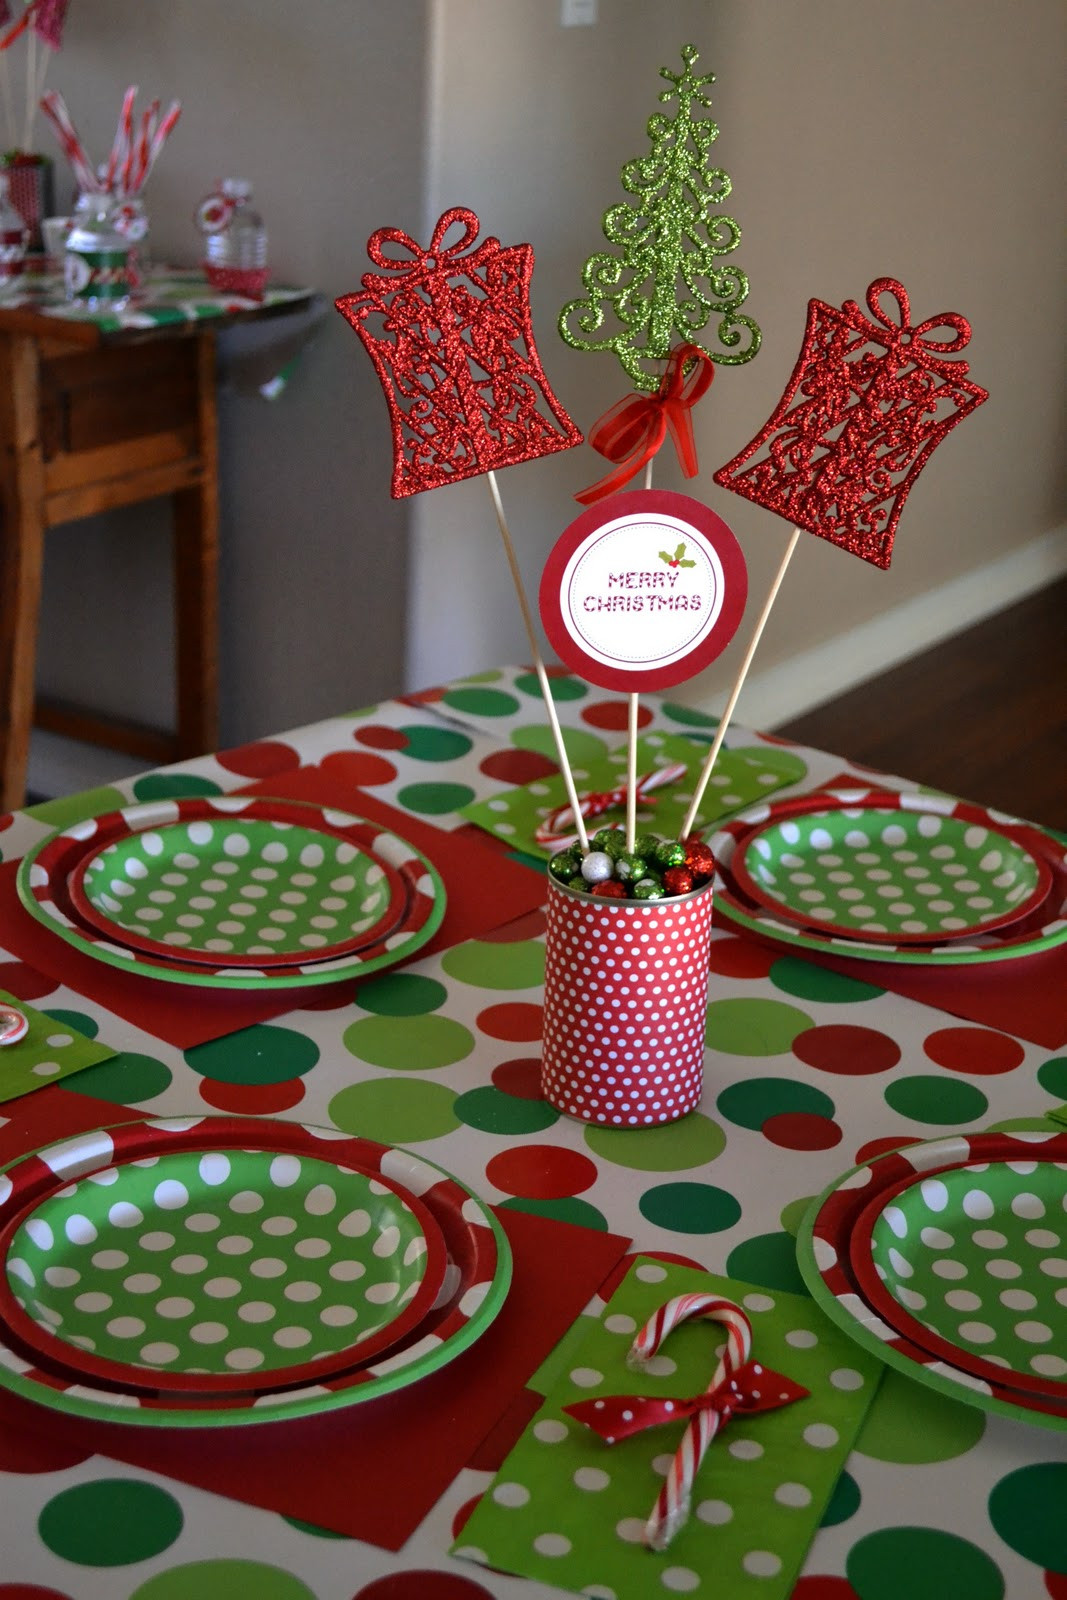 Holiday Party Decorating Ideas
 Crissy s Crafts Holly Jolly Holiday Party